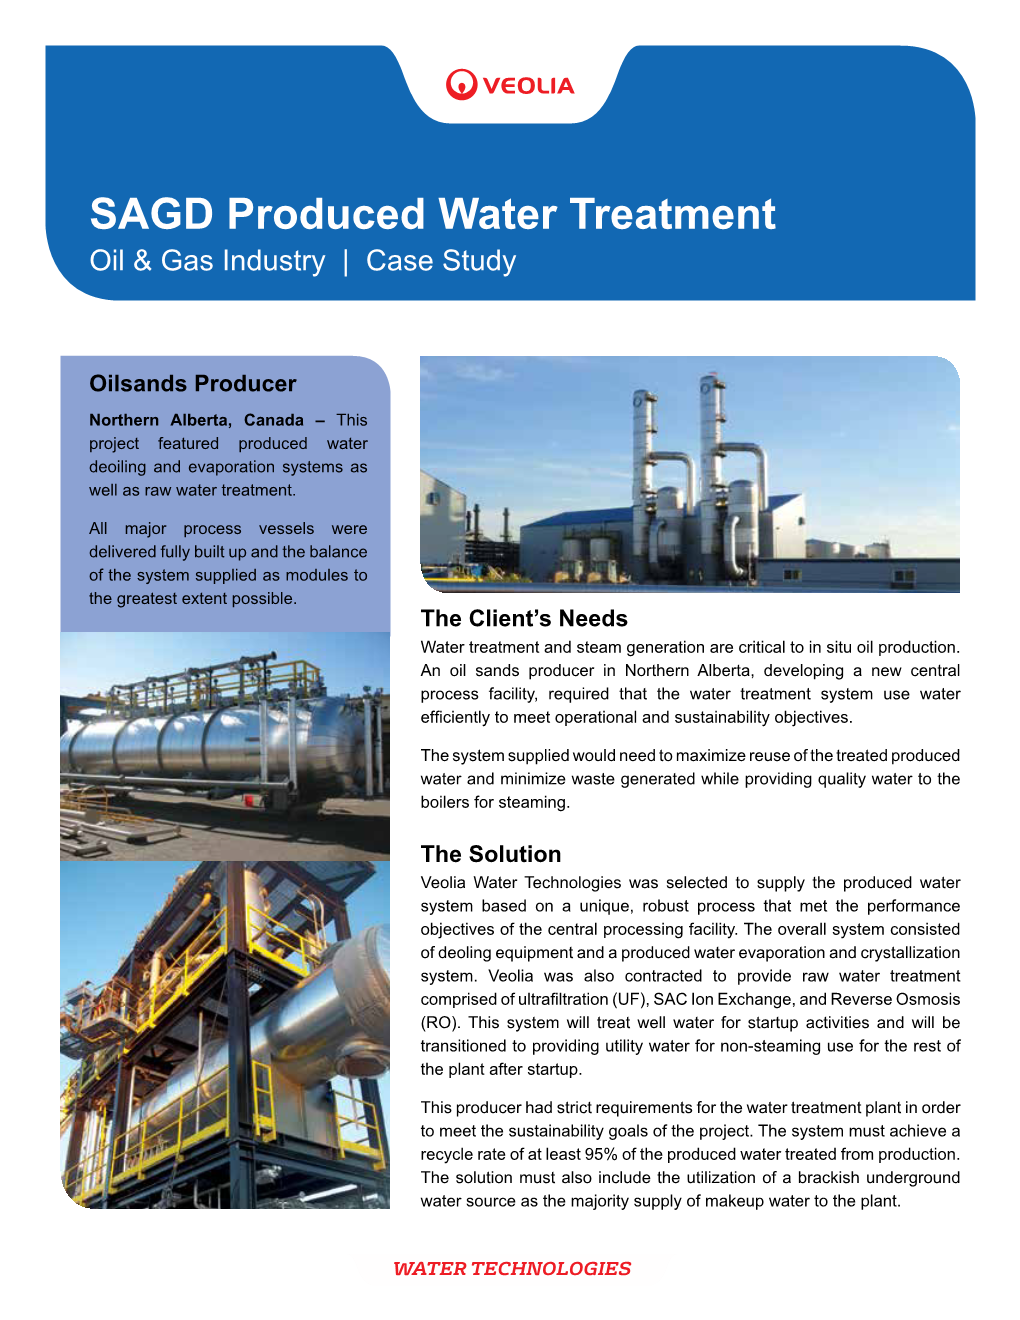 SAGD Produced Water Treatment Oil & Gas Industry | Case Study